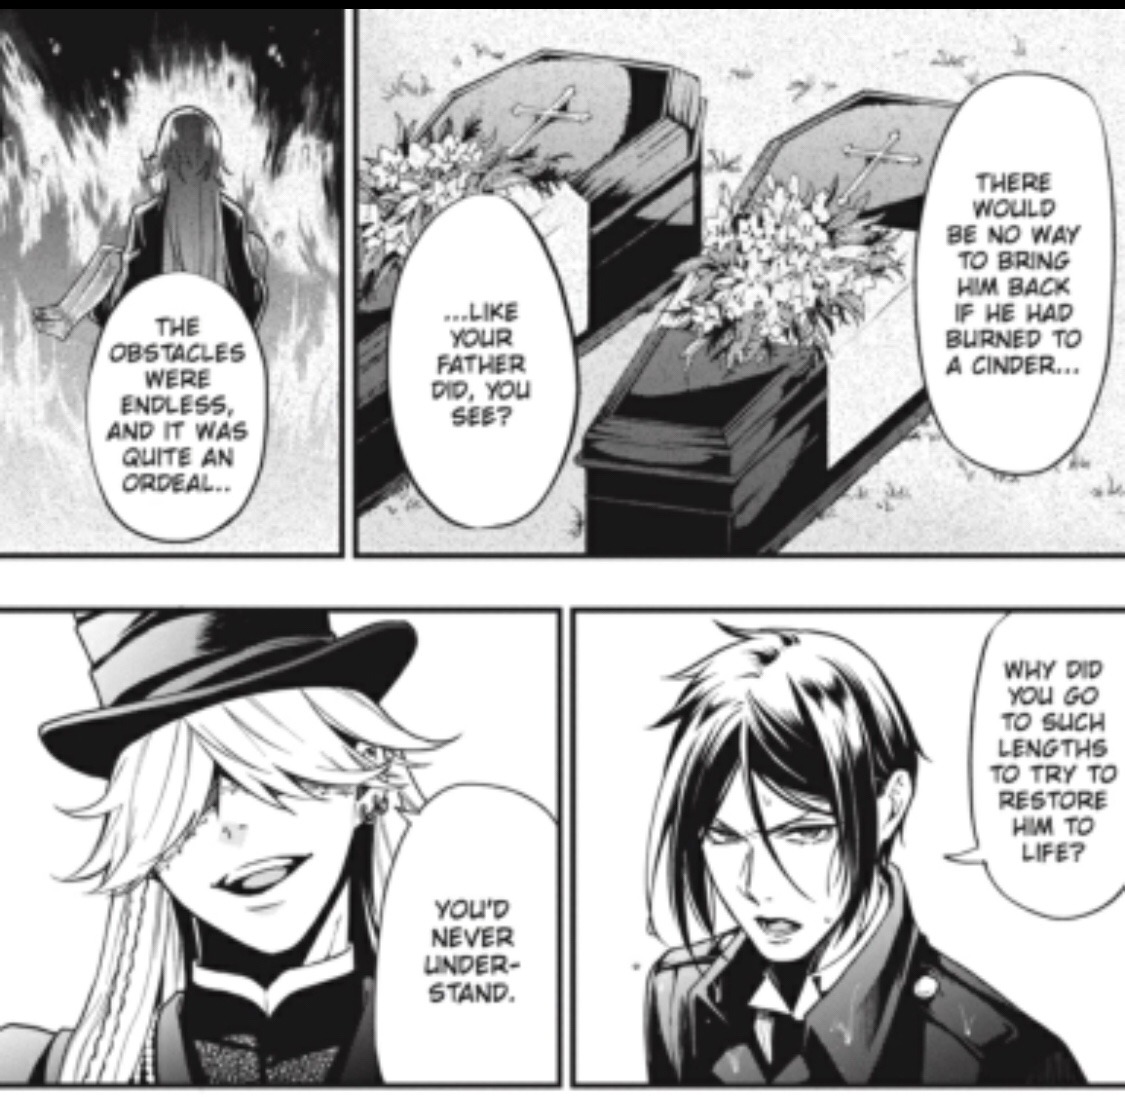 Is It Canonly Proven That Real Ciel Is Lord Sirius Where In The Manga Does This Show Does Real Ciel Hate Soma Because The Prince Was Acting Brotherly Towards Our Ciel Was